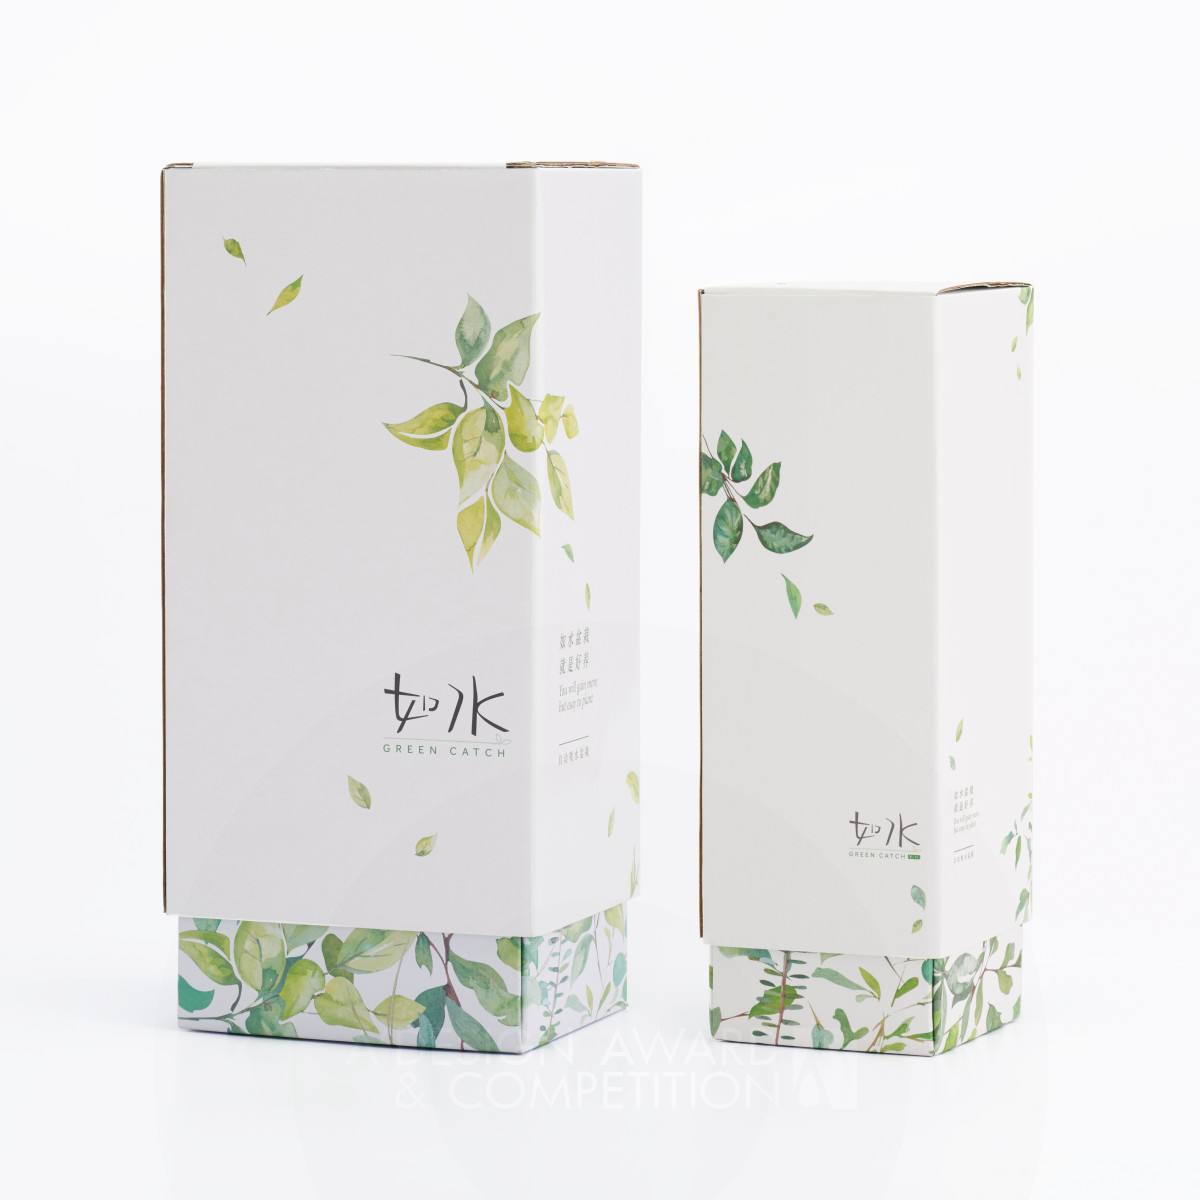 Green Catch plant packaging by The Box Brand Design Ltd.